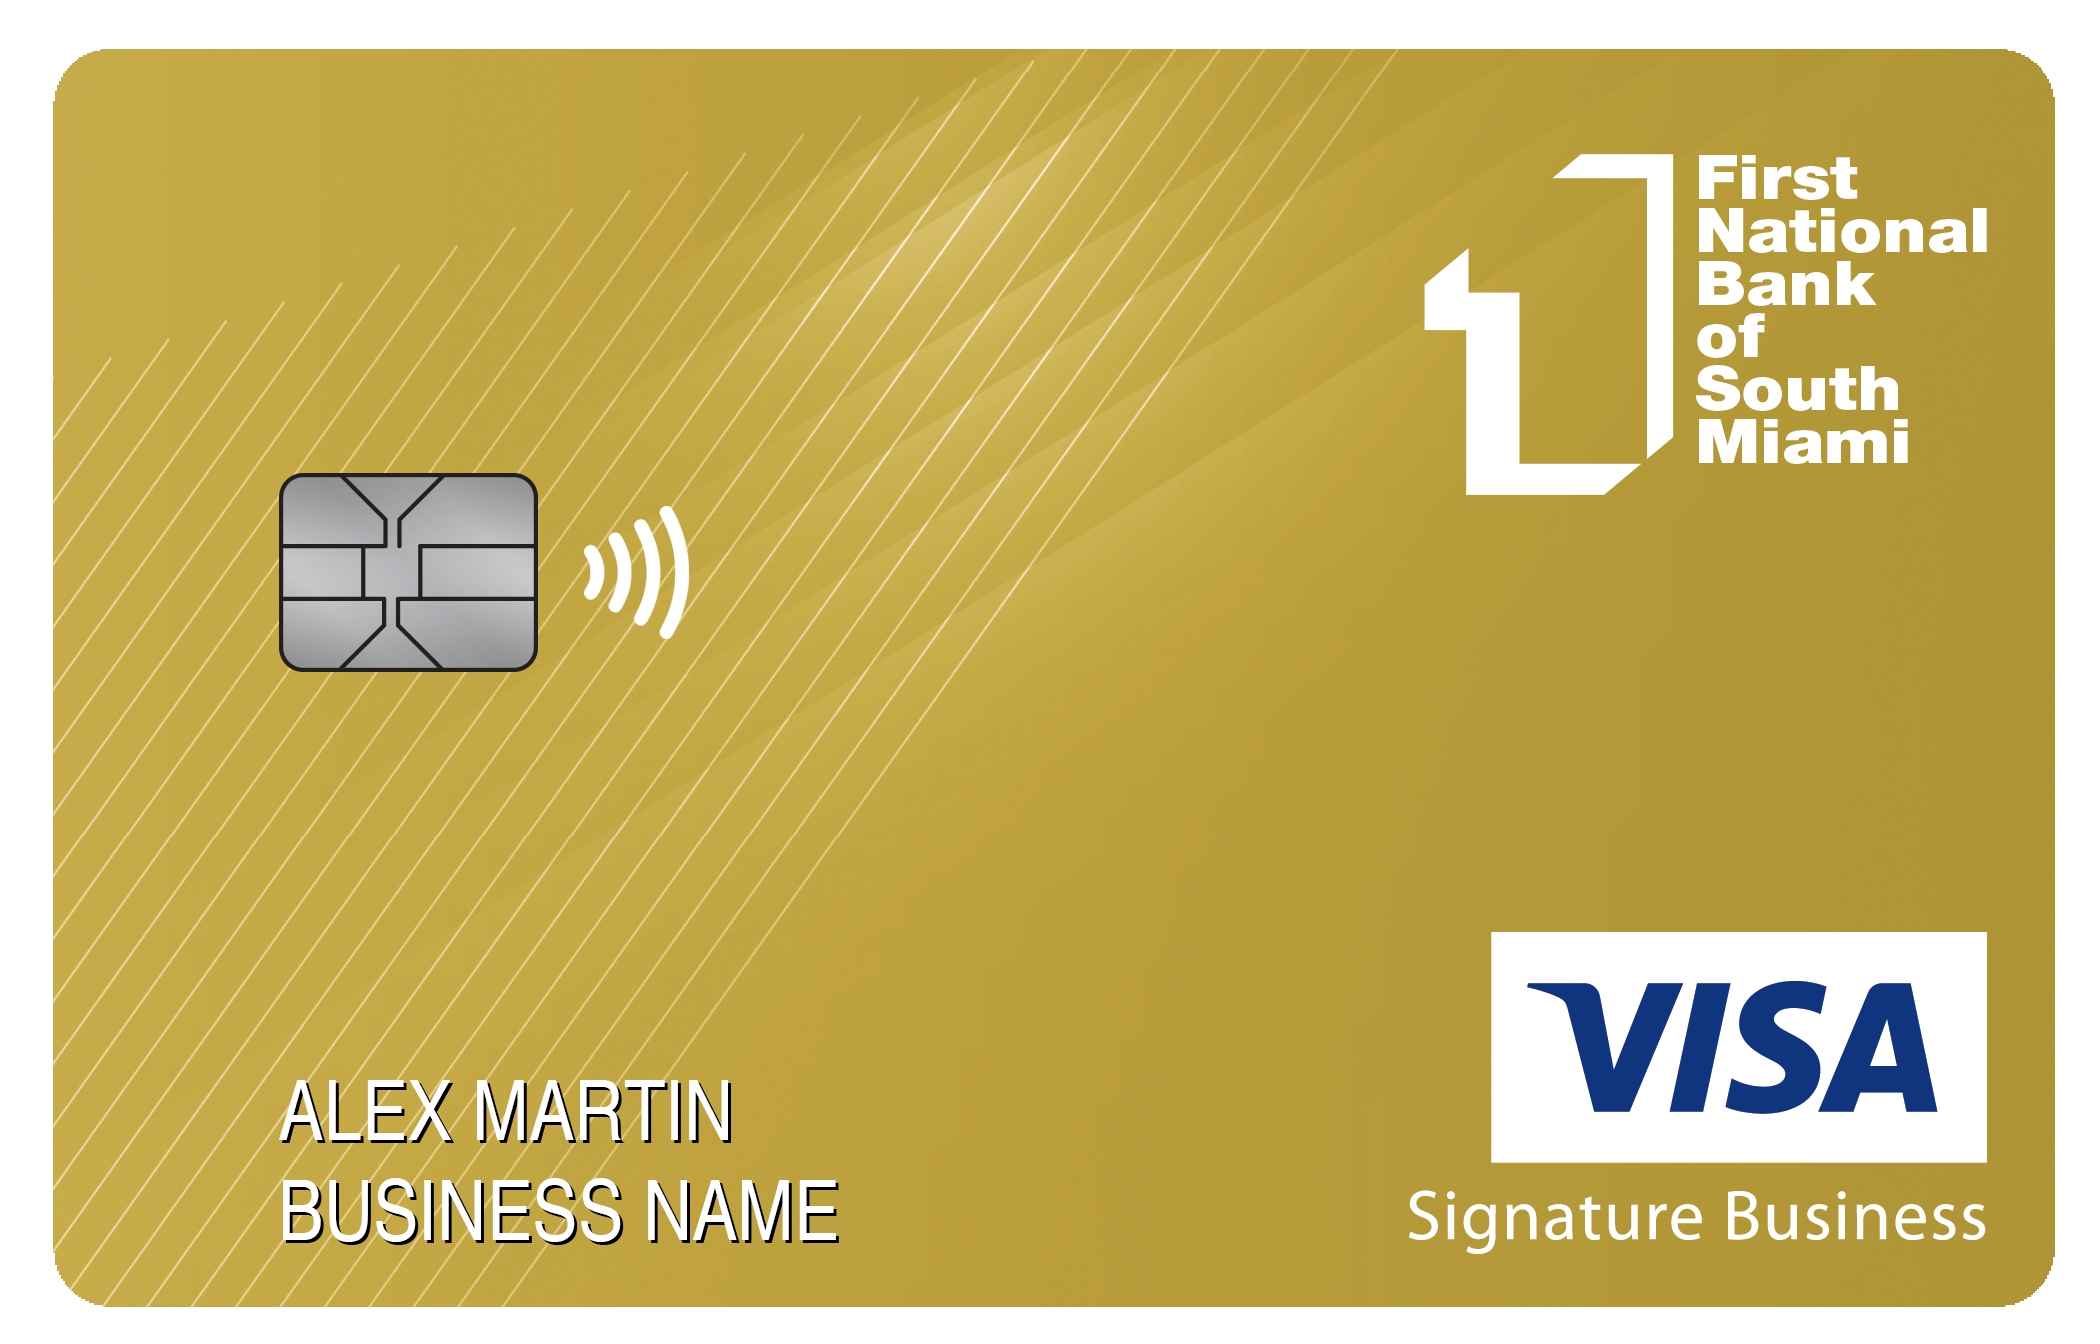 First National Bank of South Miami Smart Business Rewards Card